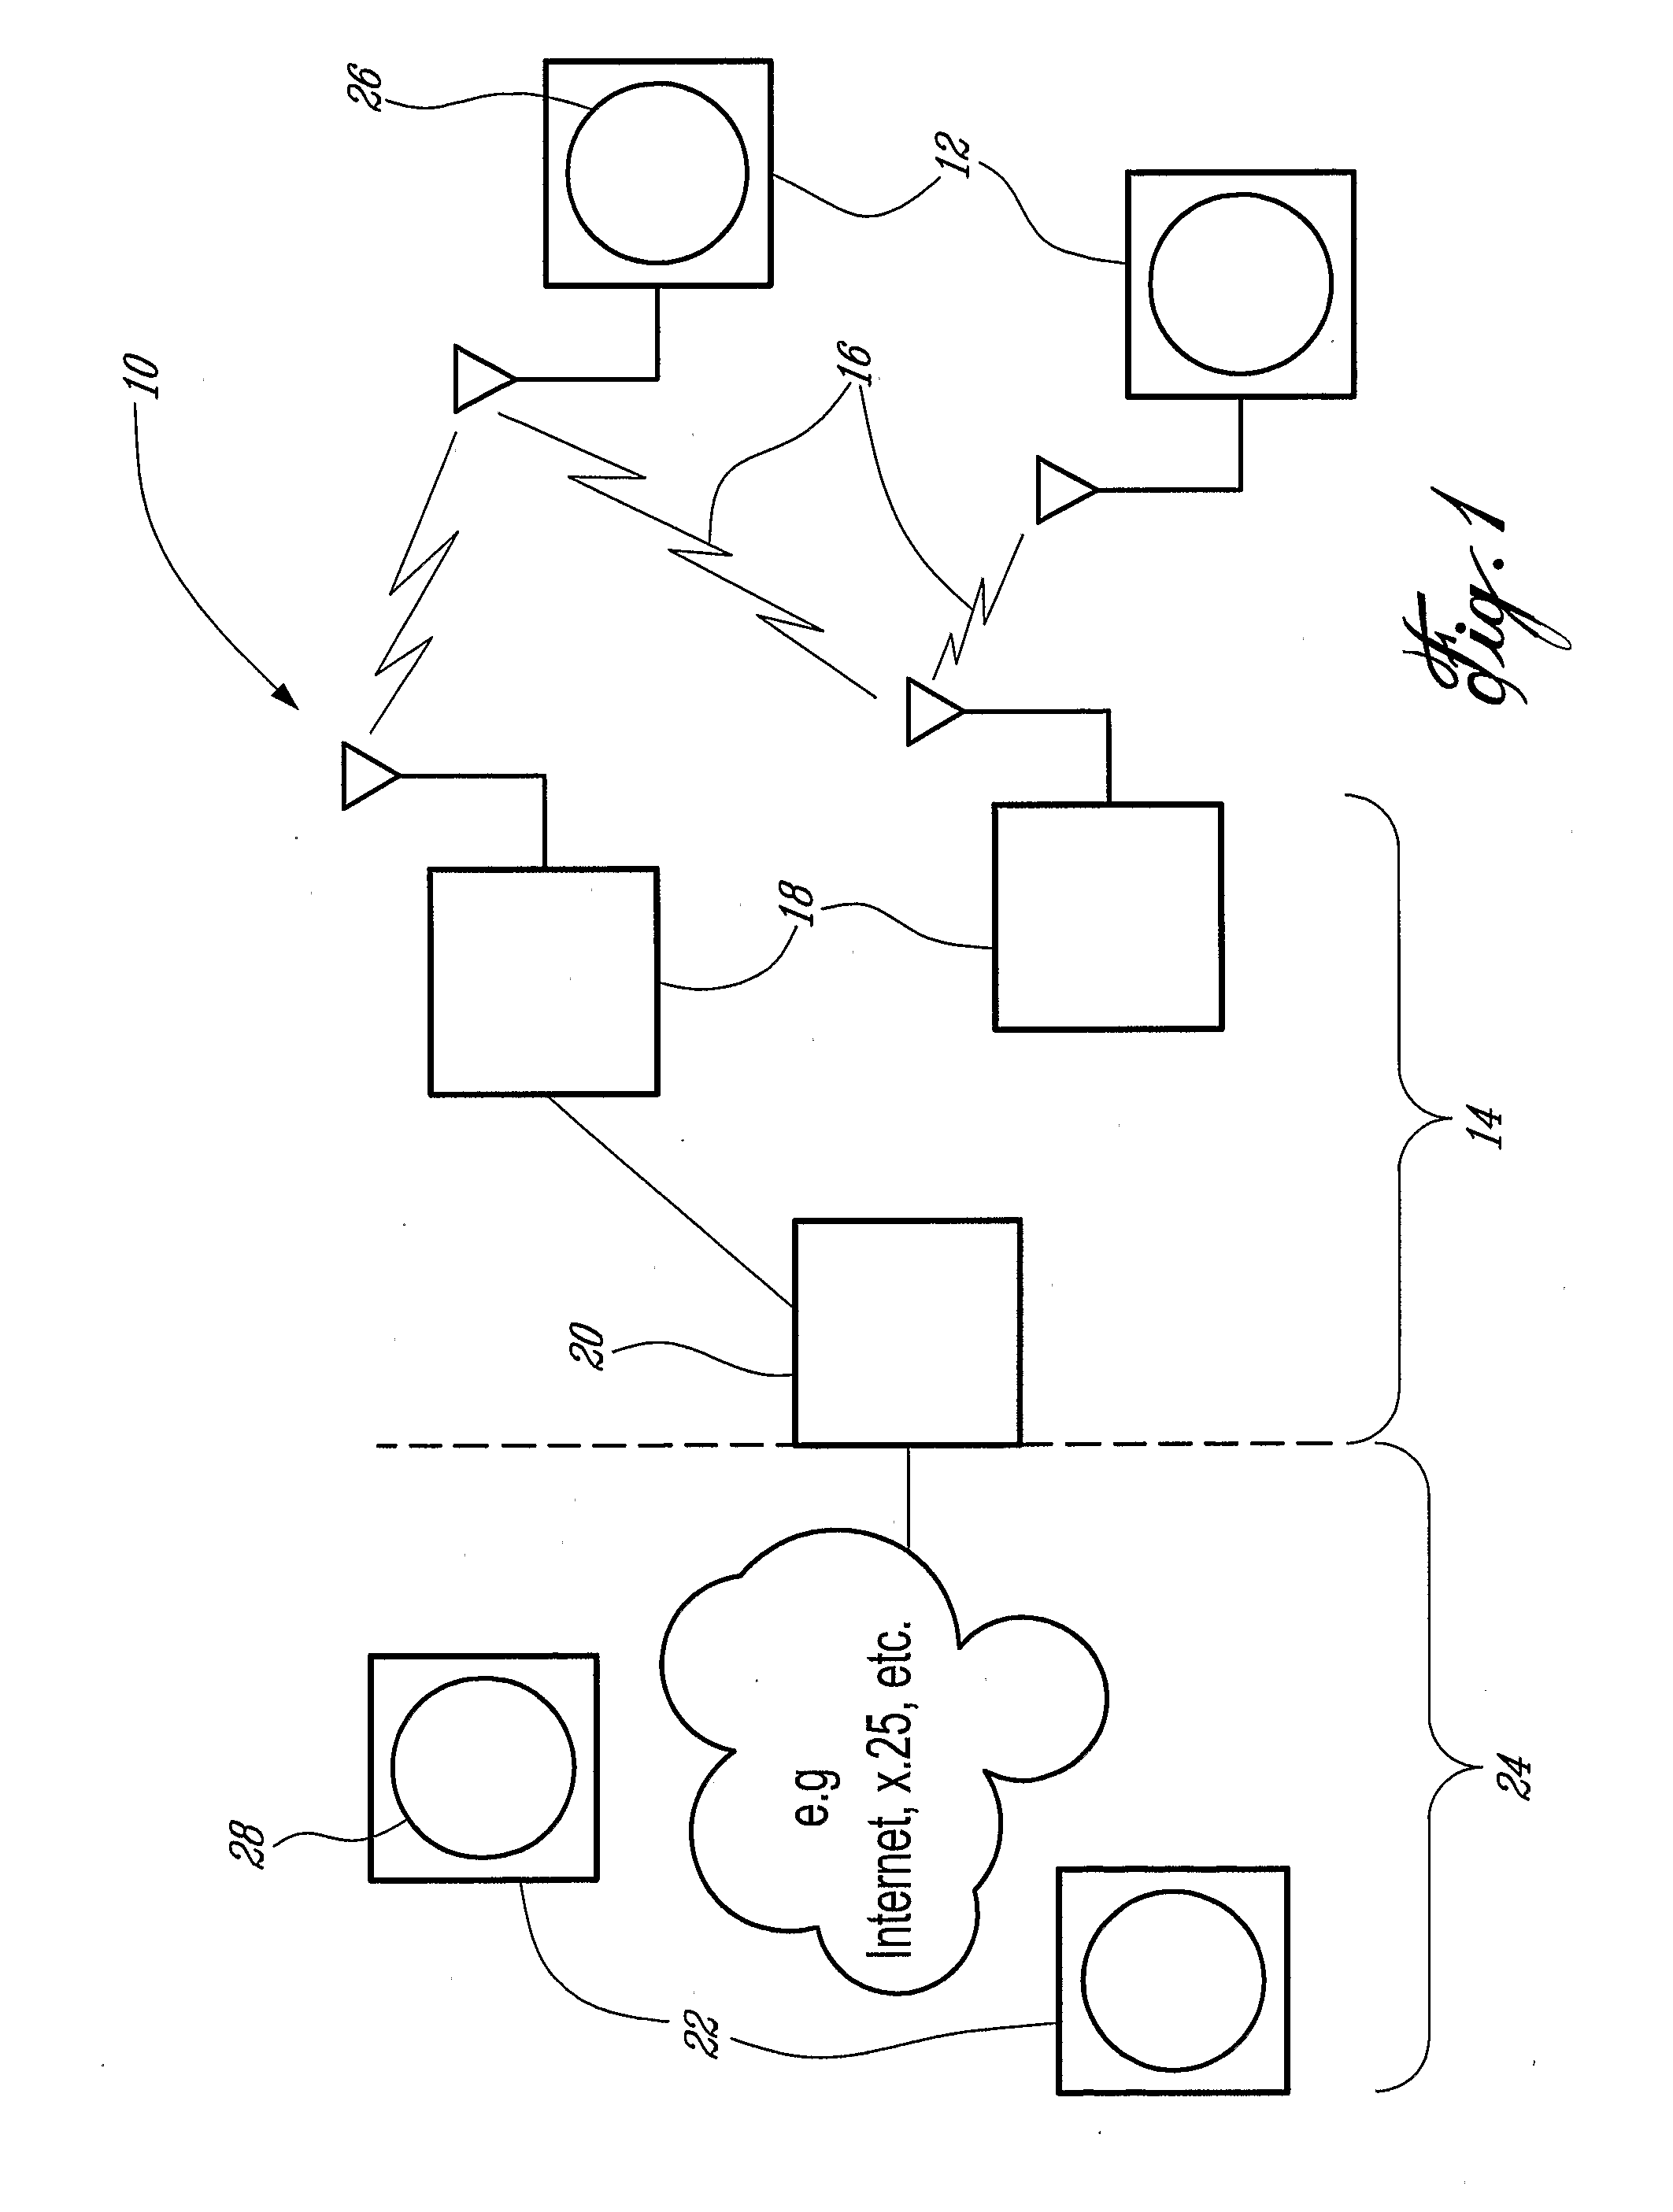 Method for Securely Associating Data with Http and Https Sessions